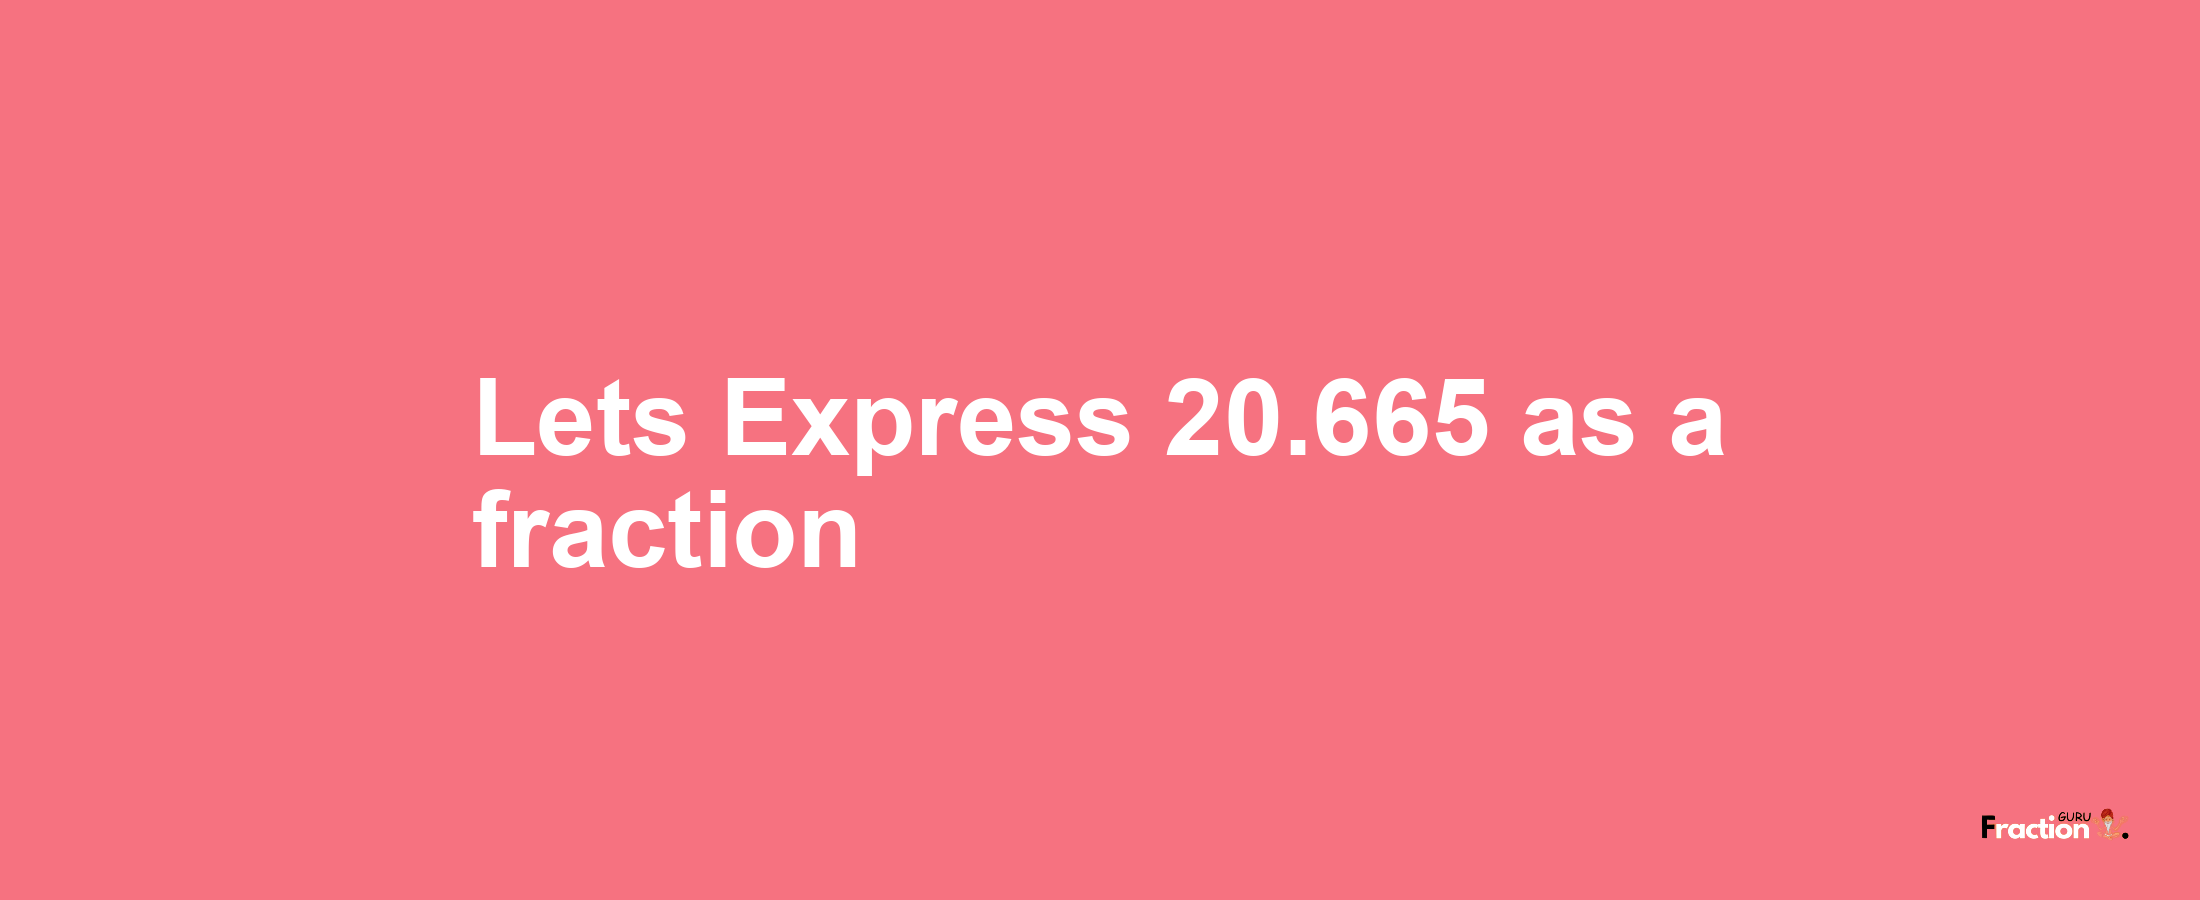 Lets Express 20.665 as afraction